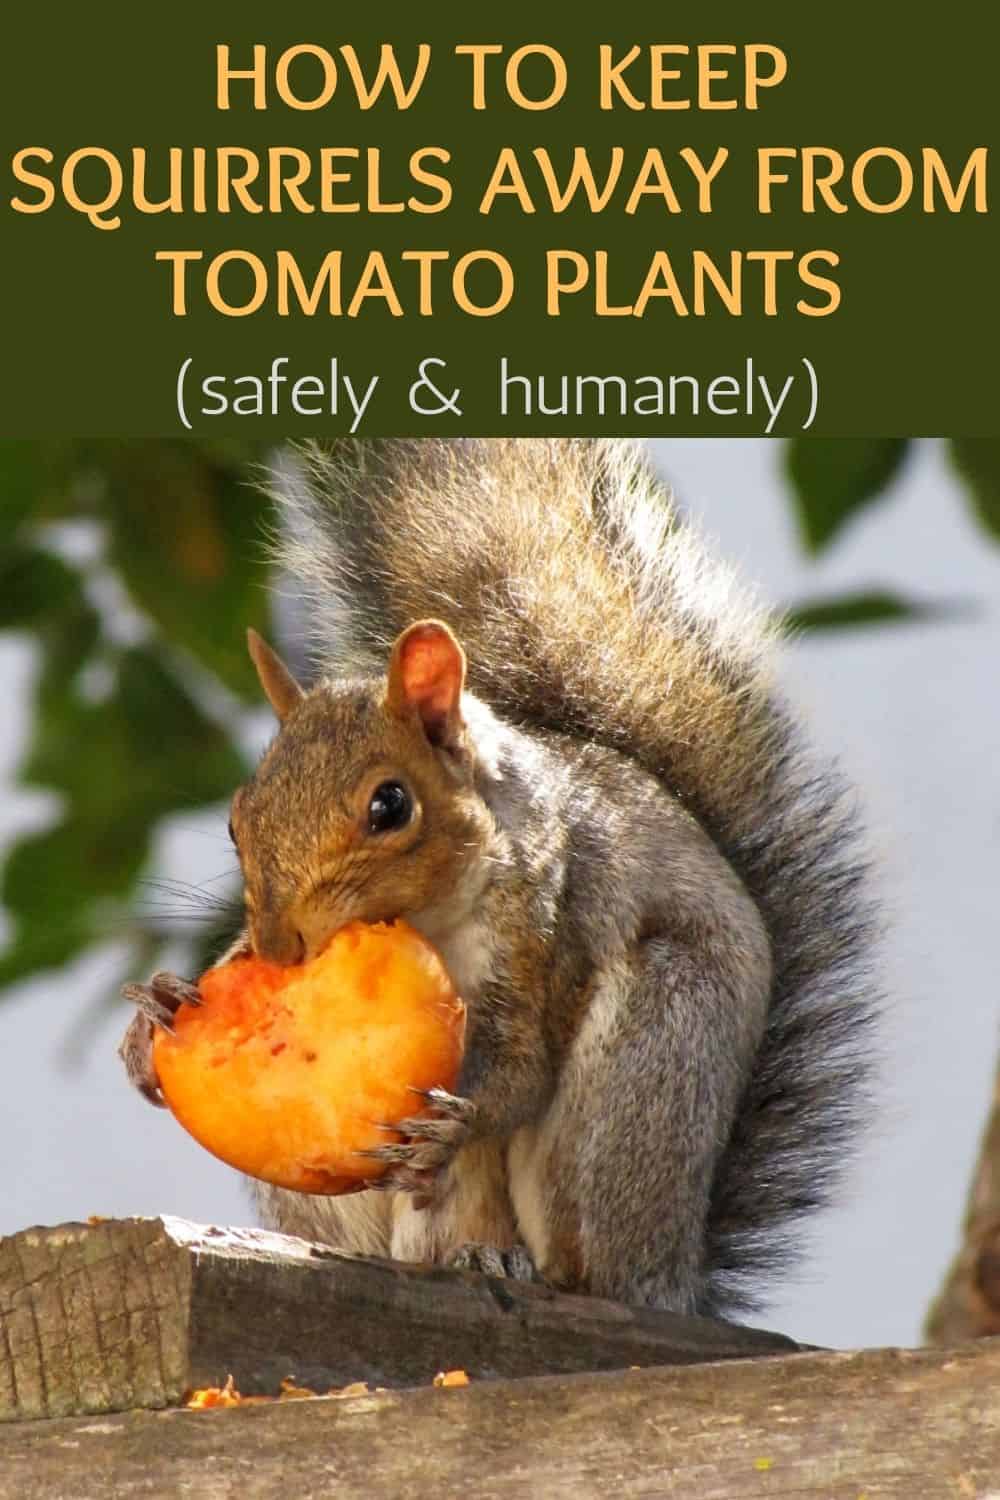 how to keep squirrels away from tomato plants safely and humanely